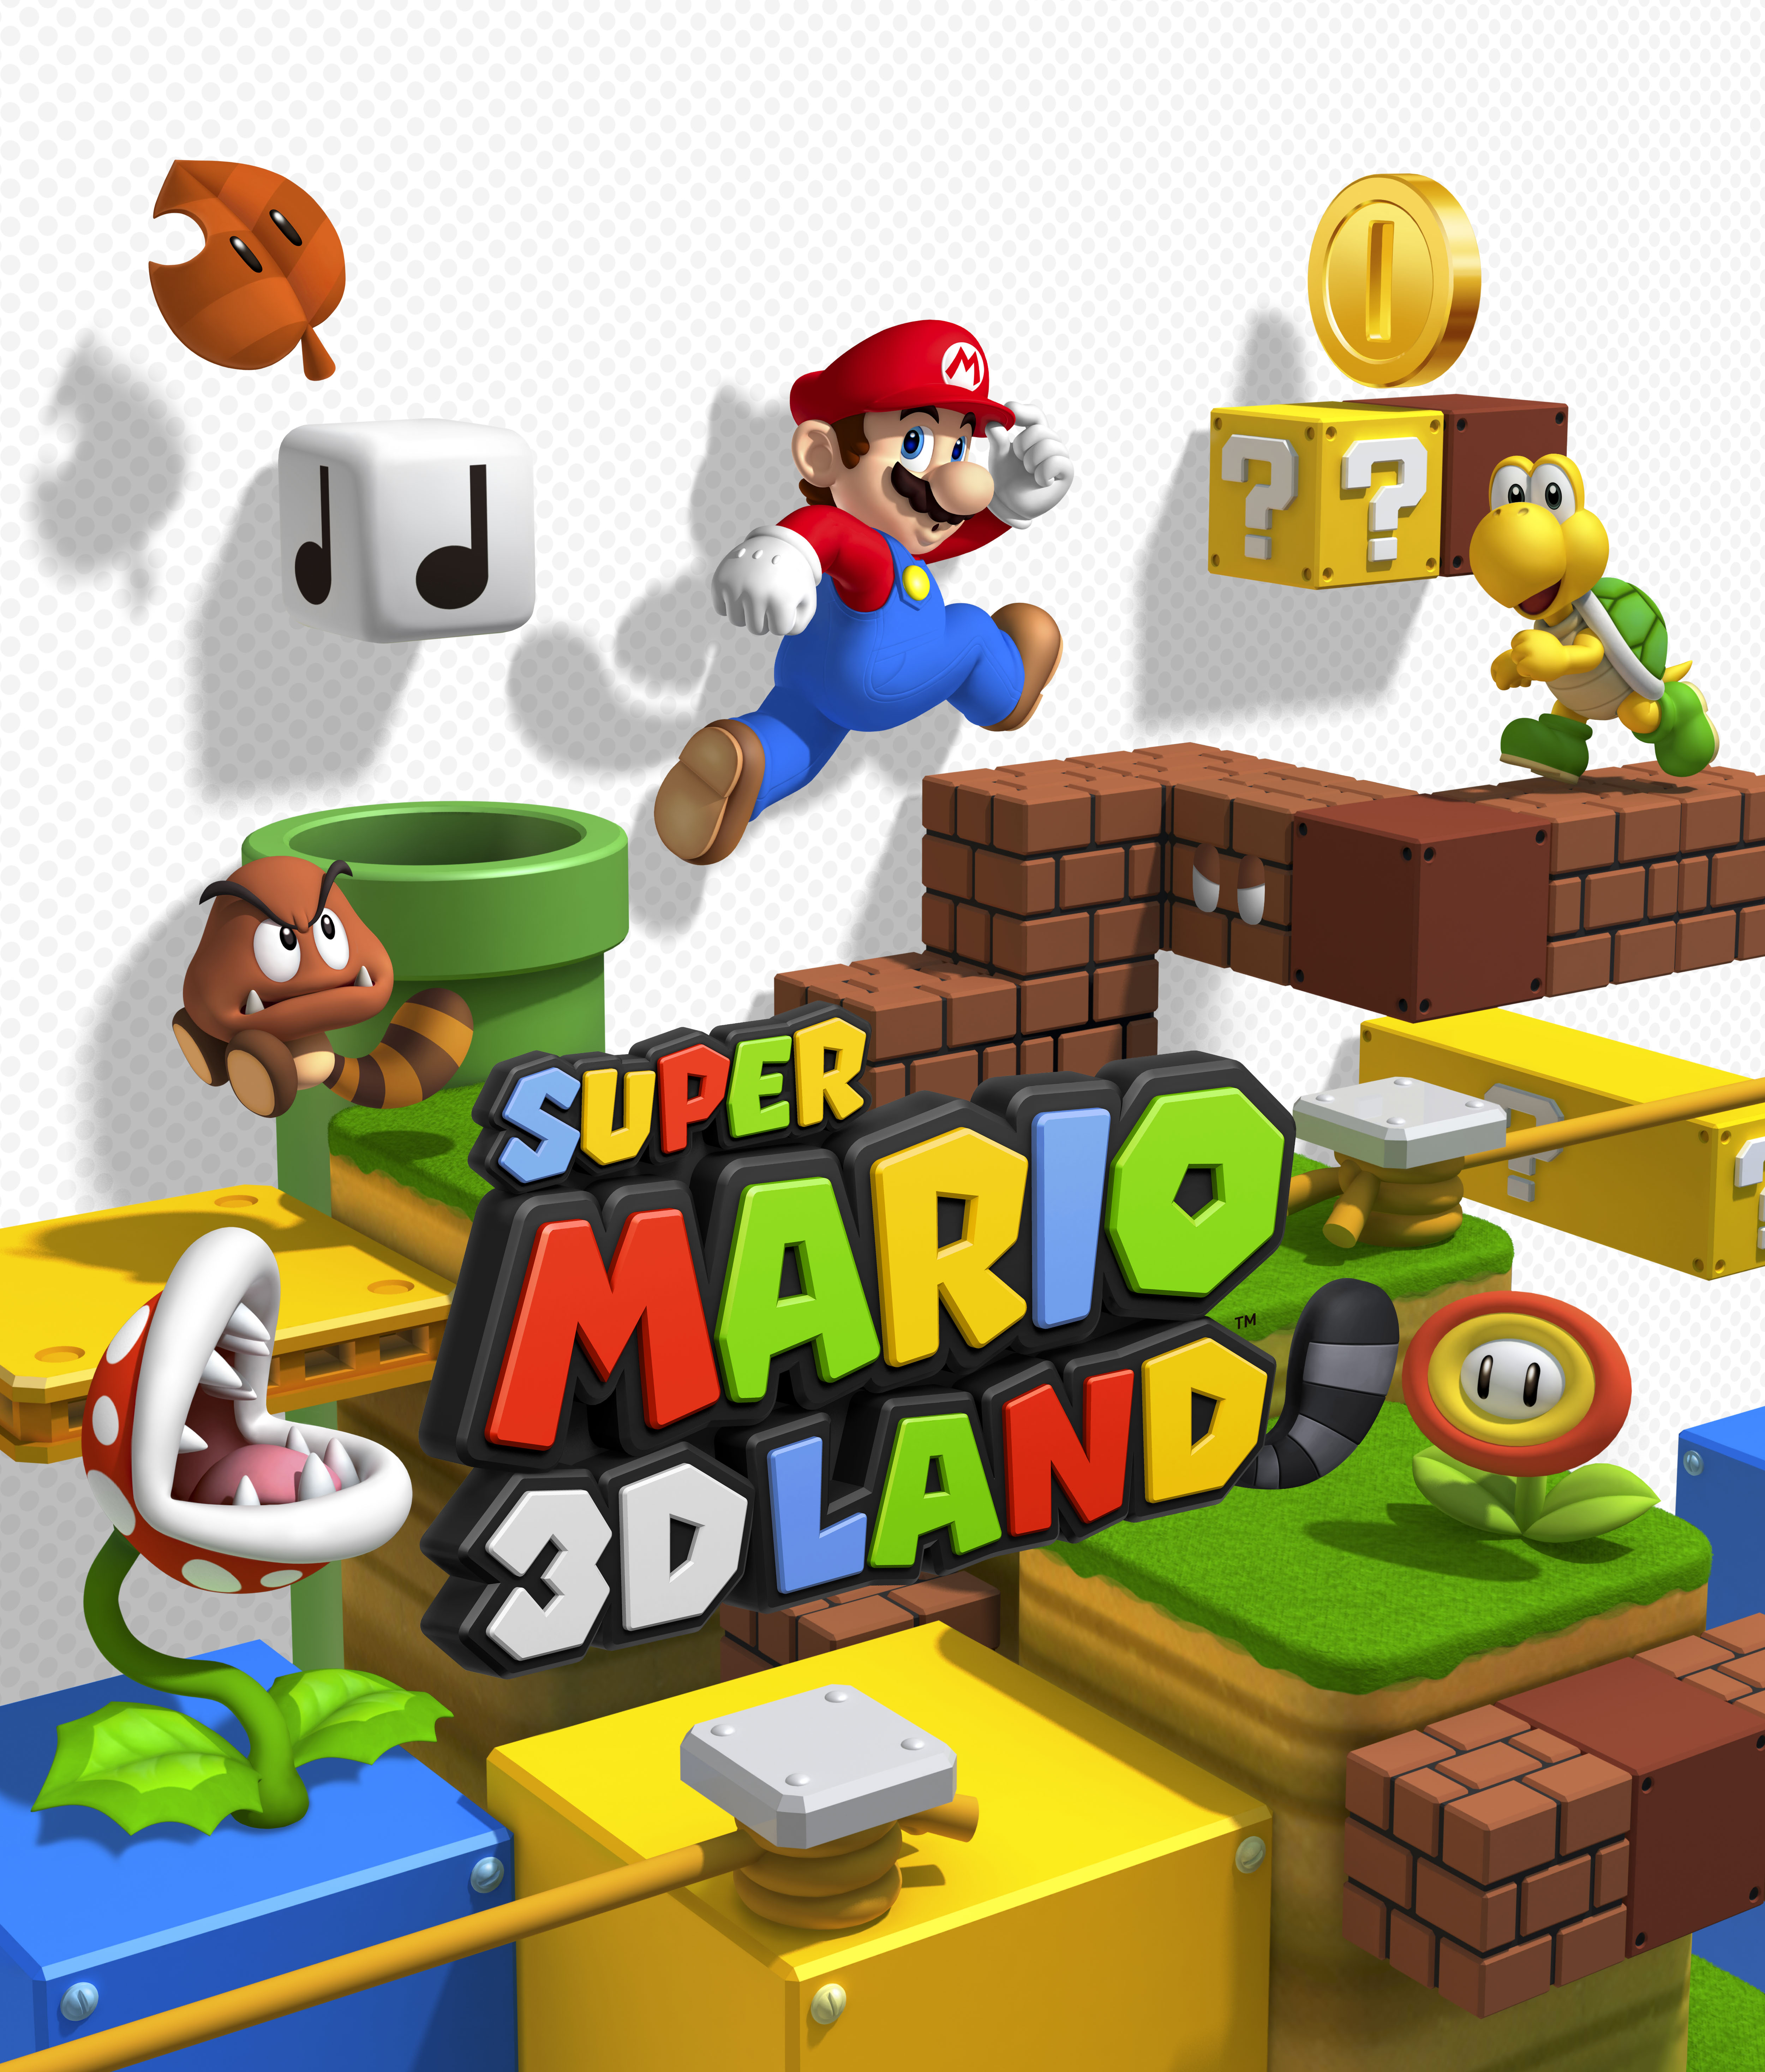 super mario 3d land game for free